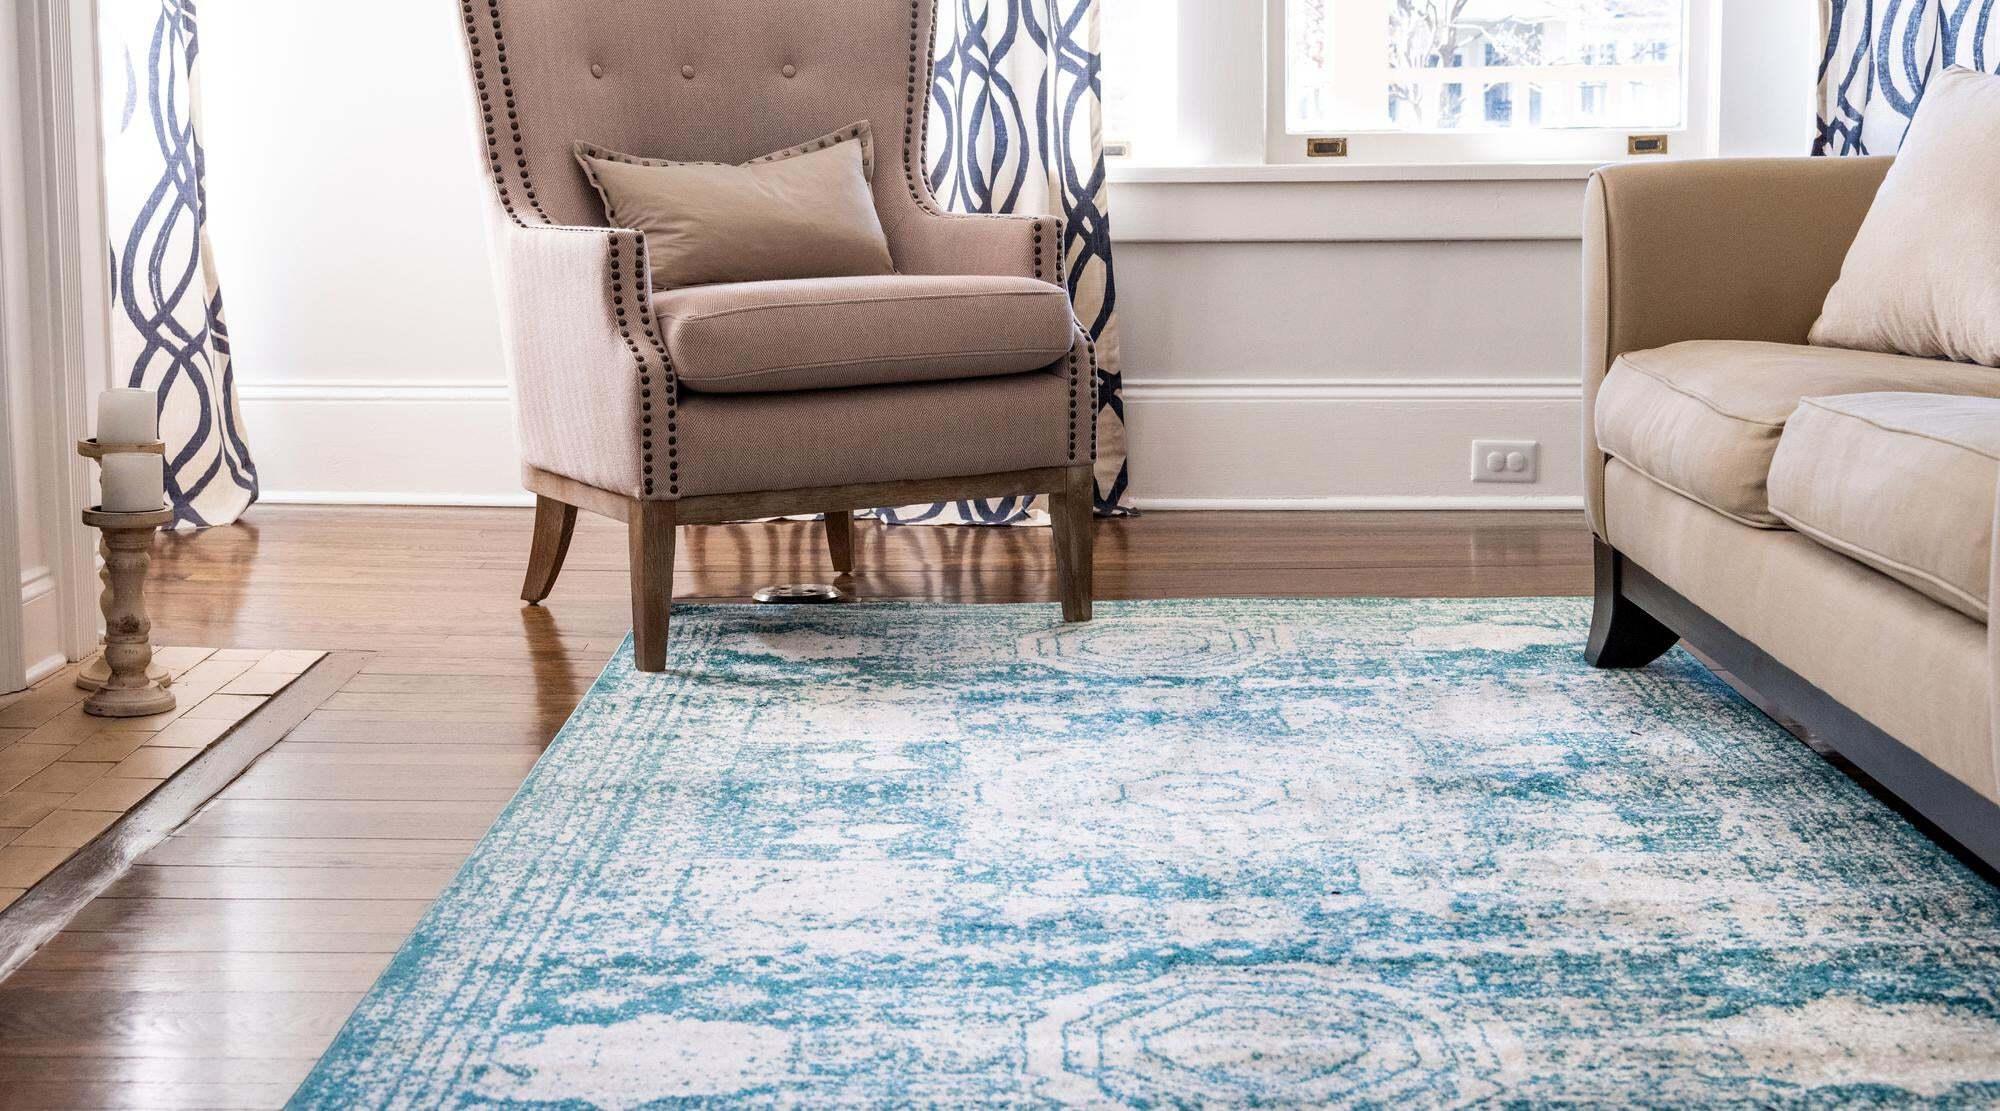 Unique Loom Indoor Rugs - Bromley Border Rectangular 8x10 Rug Turquoise & Ivory